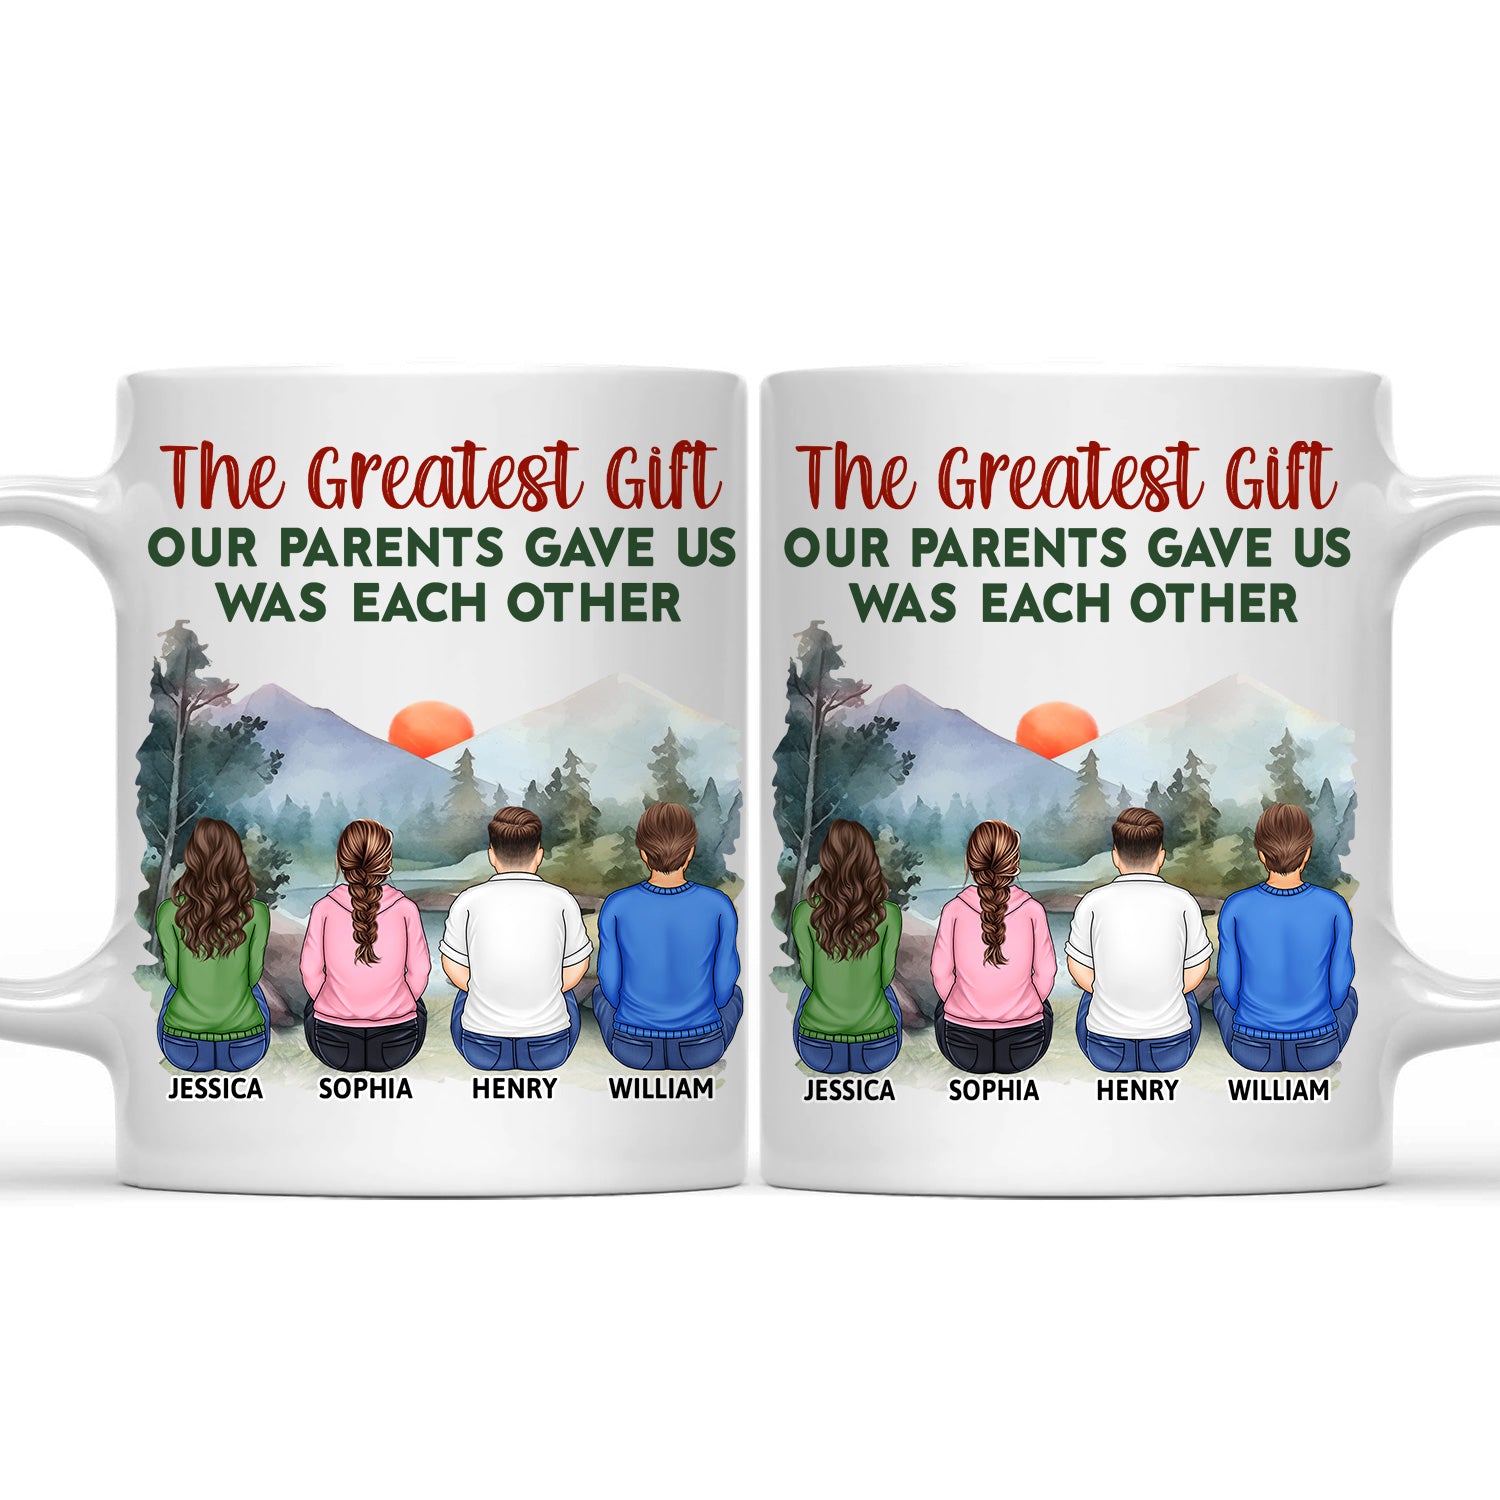 The Greatest Gift Our Parents Gave Us - Gift For Sisters, Brothers, Siblings, Family - Personalized Mug